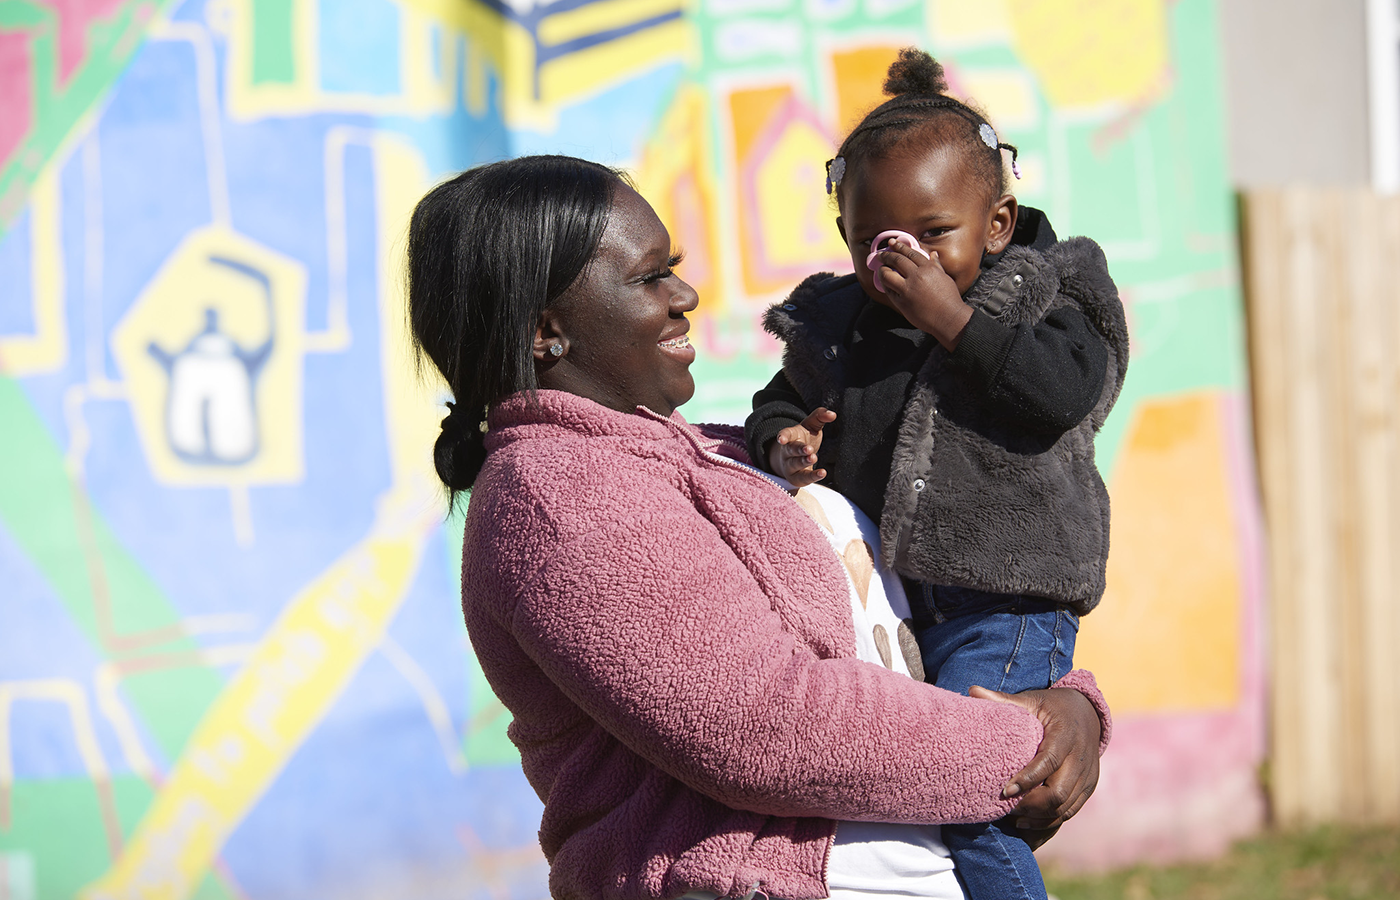 talicia with her daughter standing in front of a mural